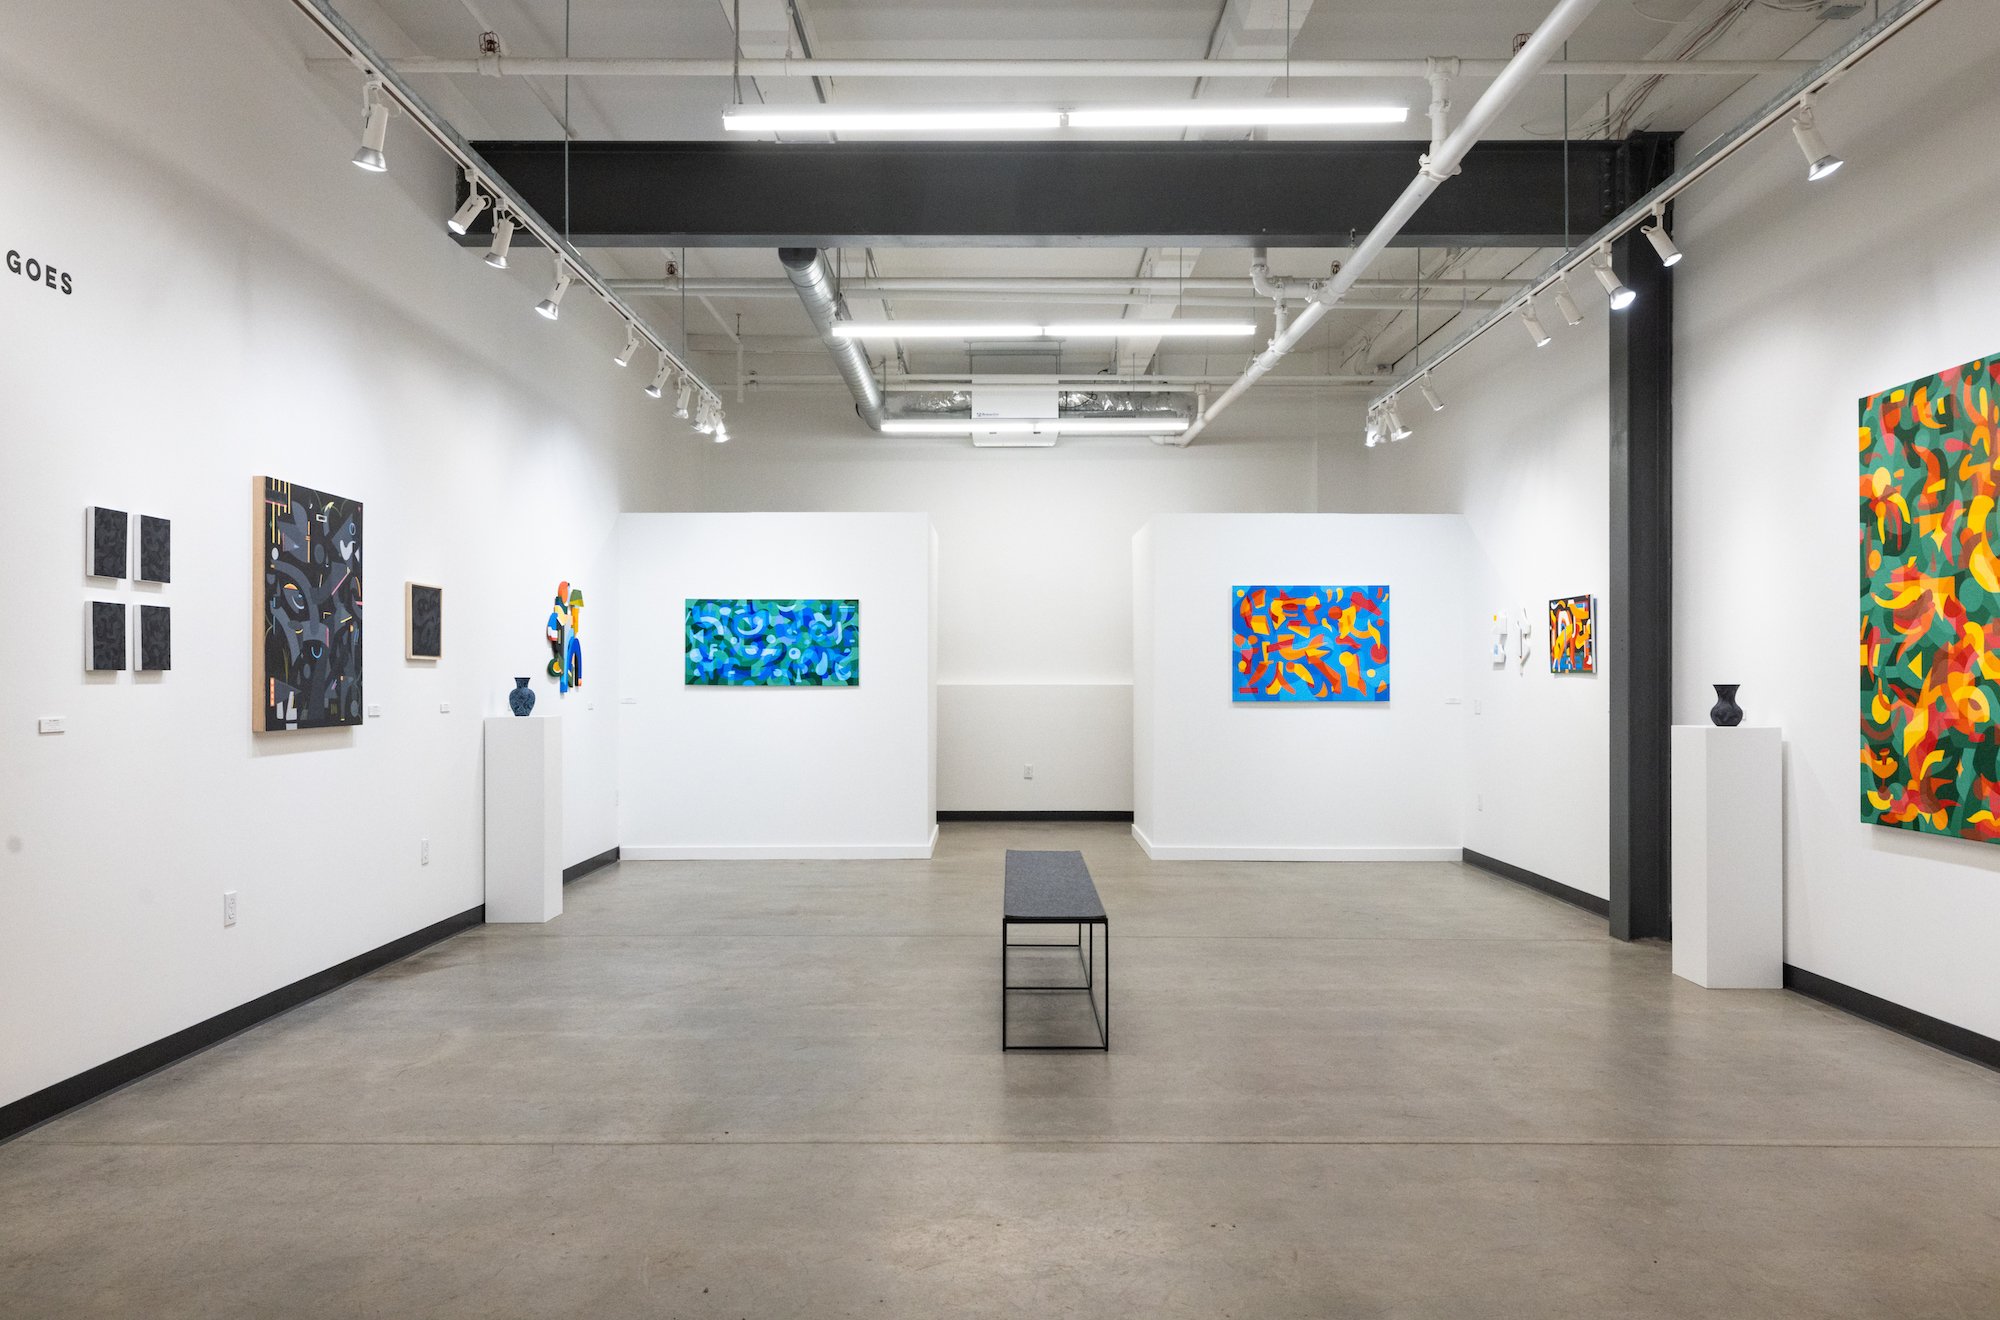 Art Gallery Installation View of Will Gebhard's Solo Exhibition of Original Abstract Paintings at Soapbox Arts Gallery in Burlington, Vermont